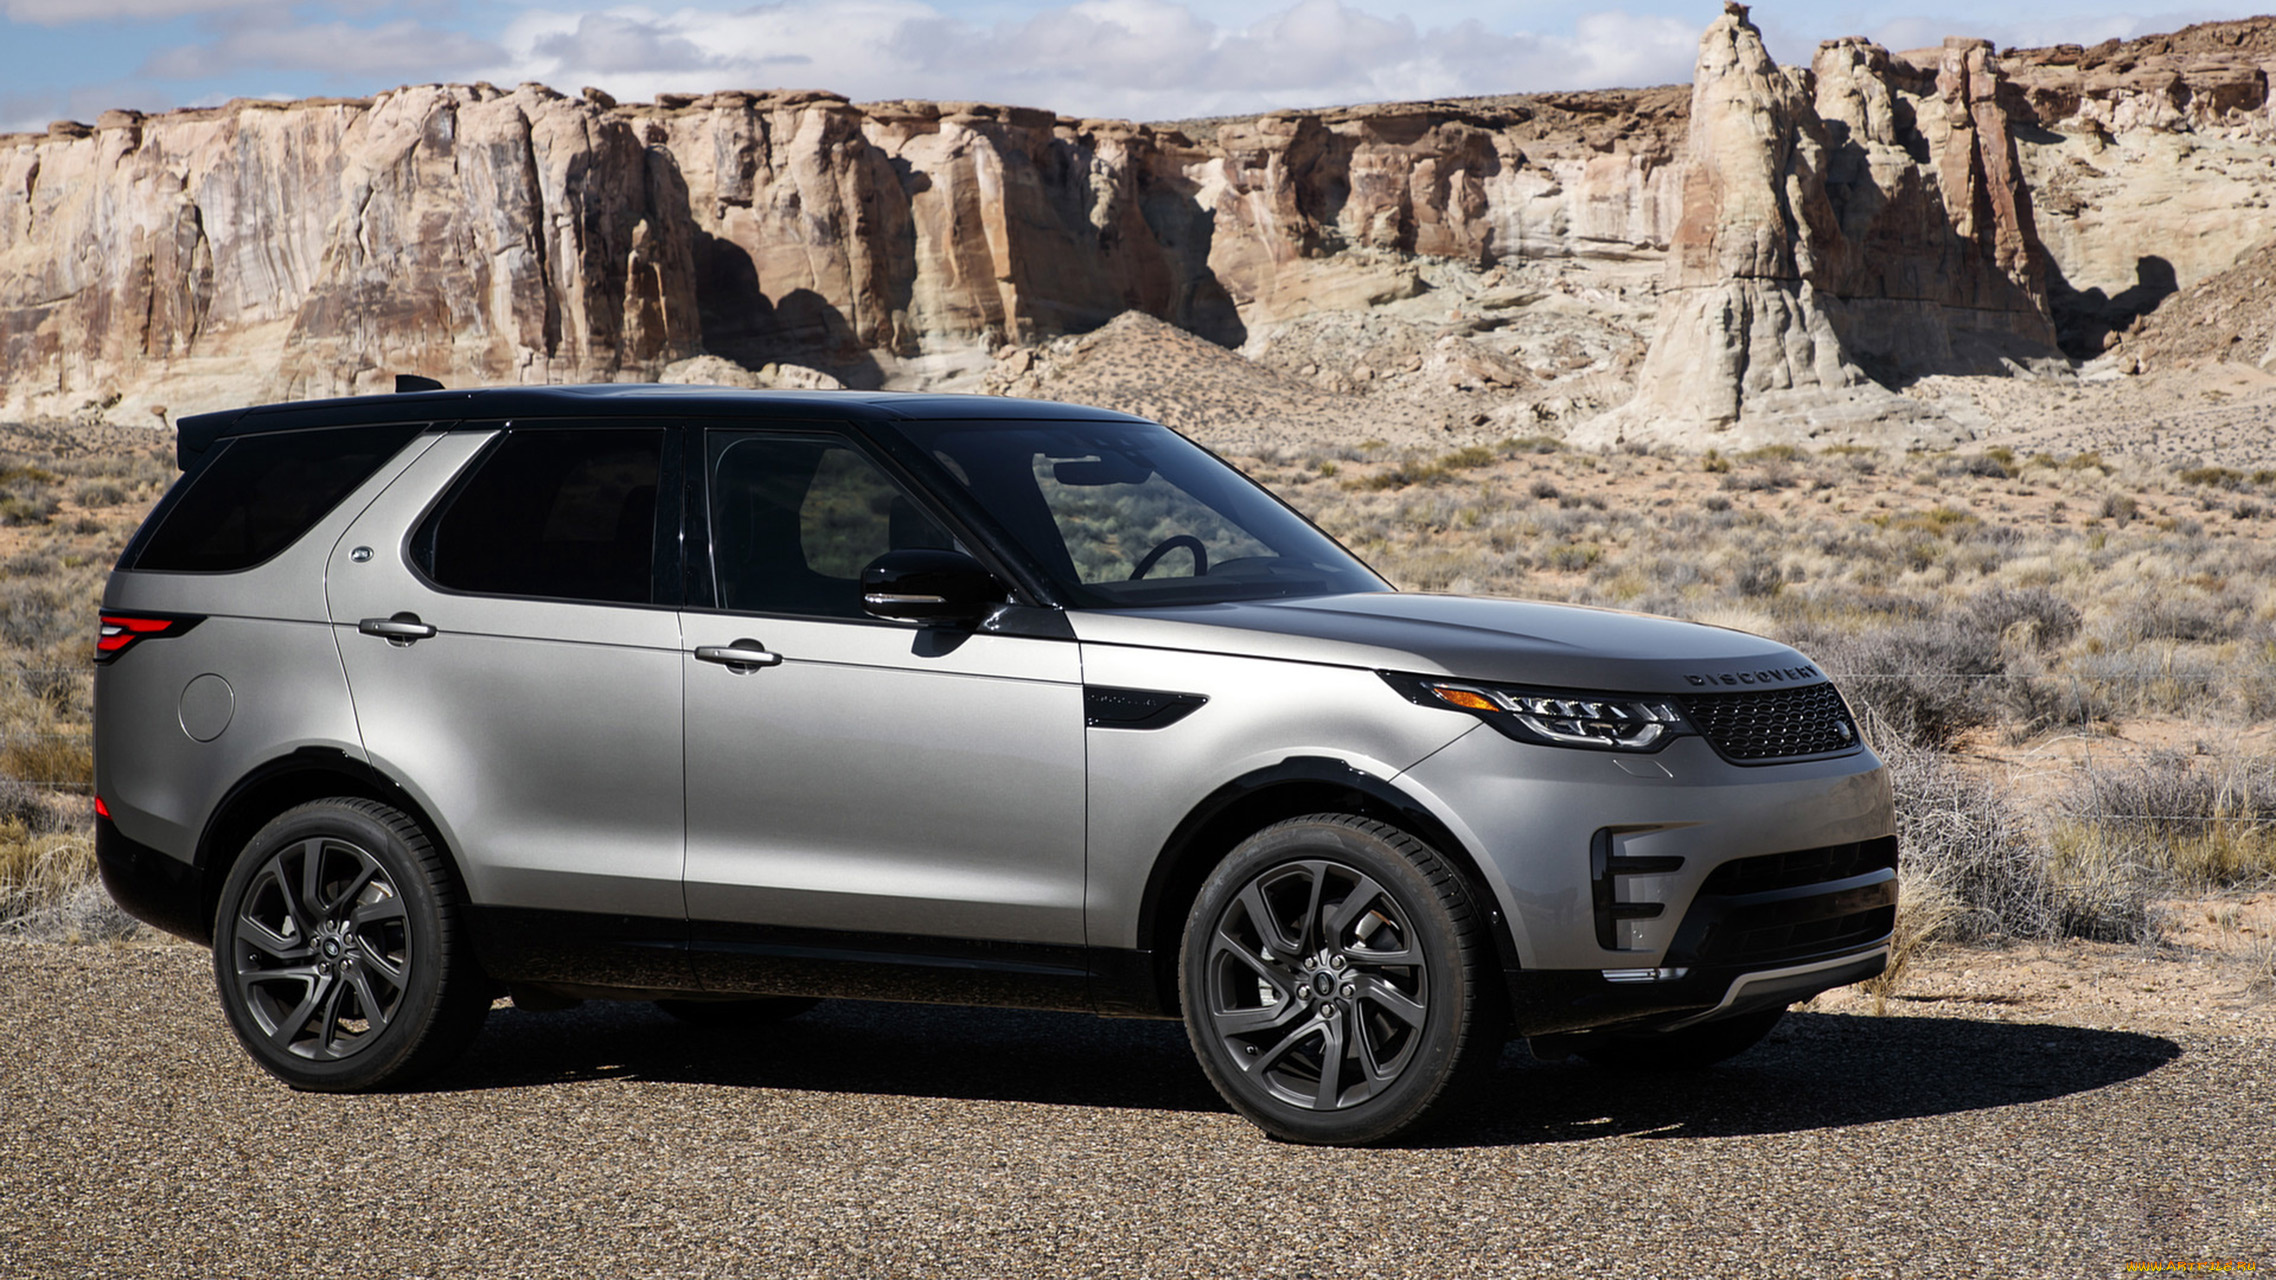 land-rover, discovery, hse, si6, 2018, автомобили, land-rover, 2018, si6, hse, discovery